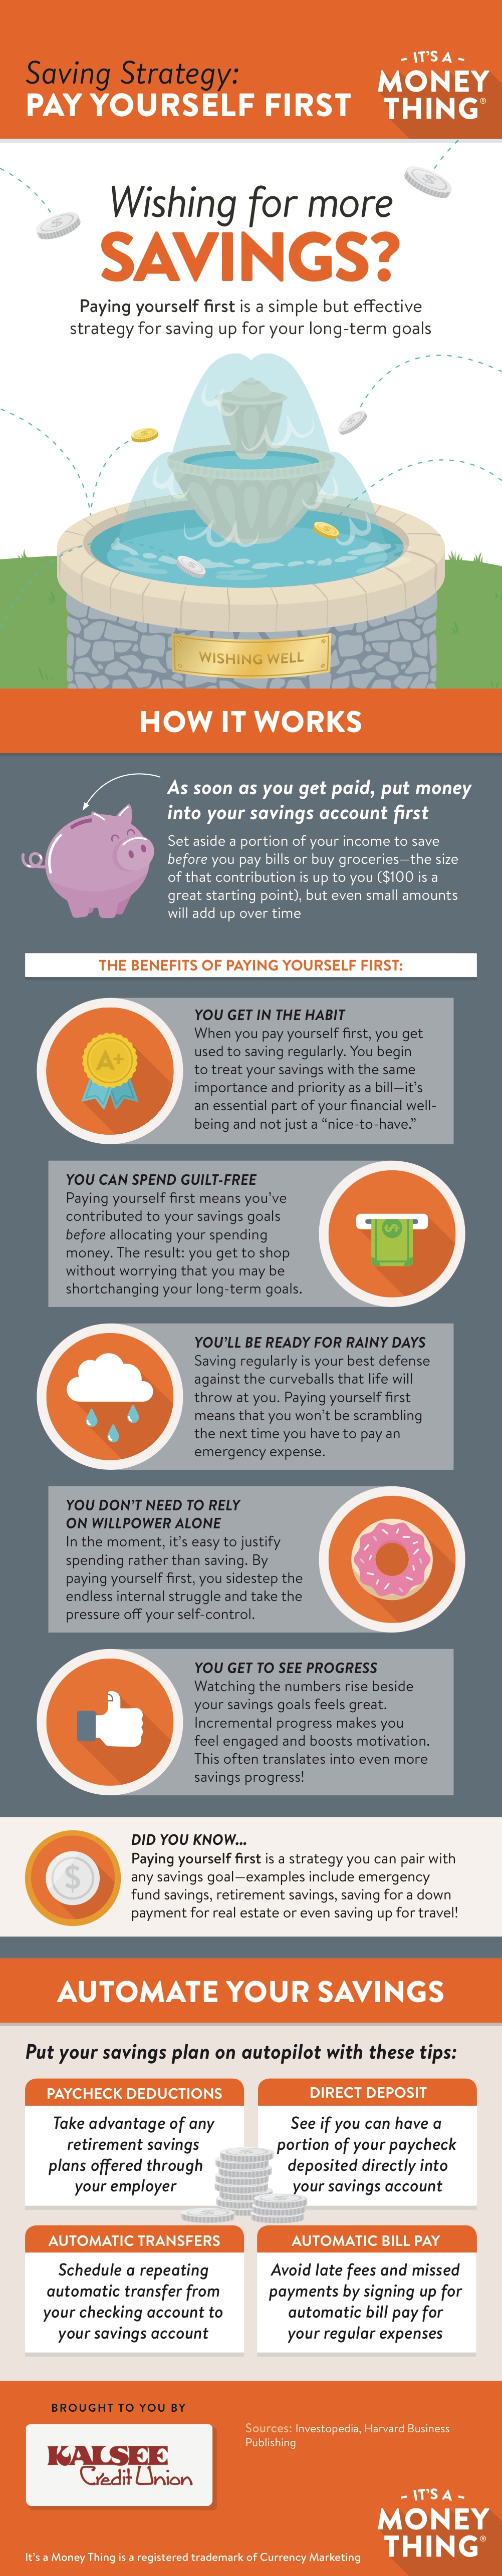 pay yourself first infographic, click for transcription